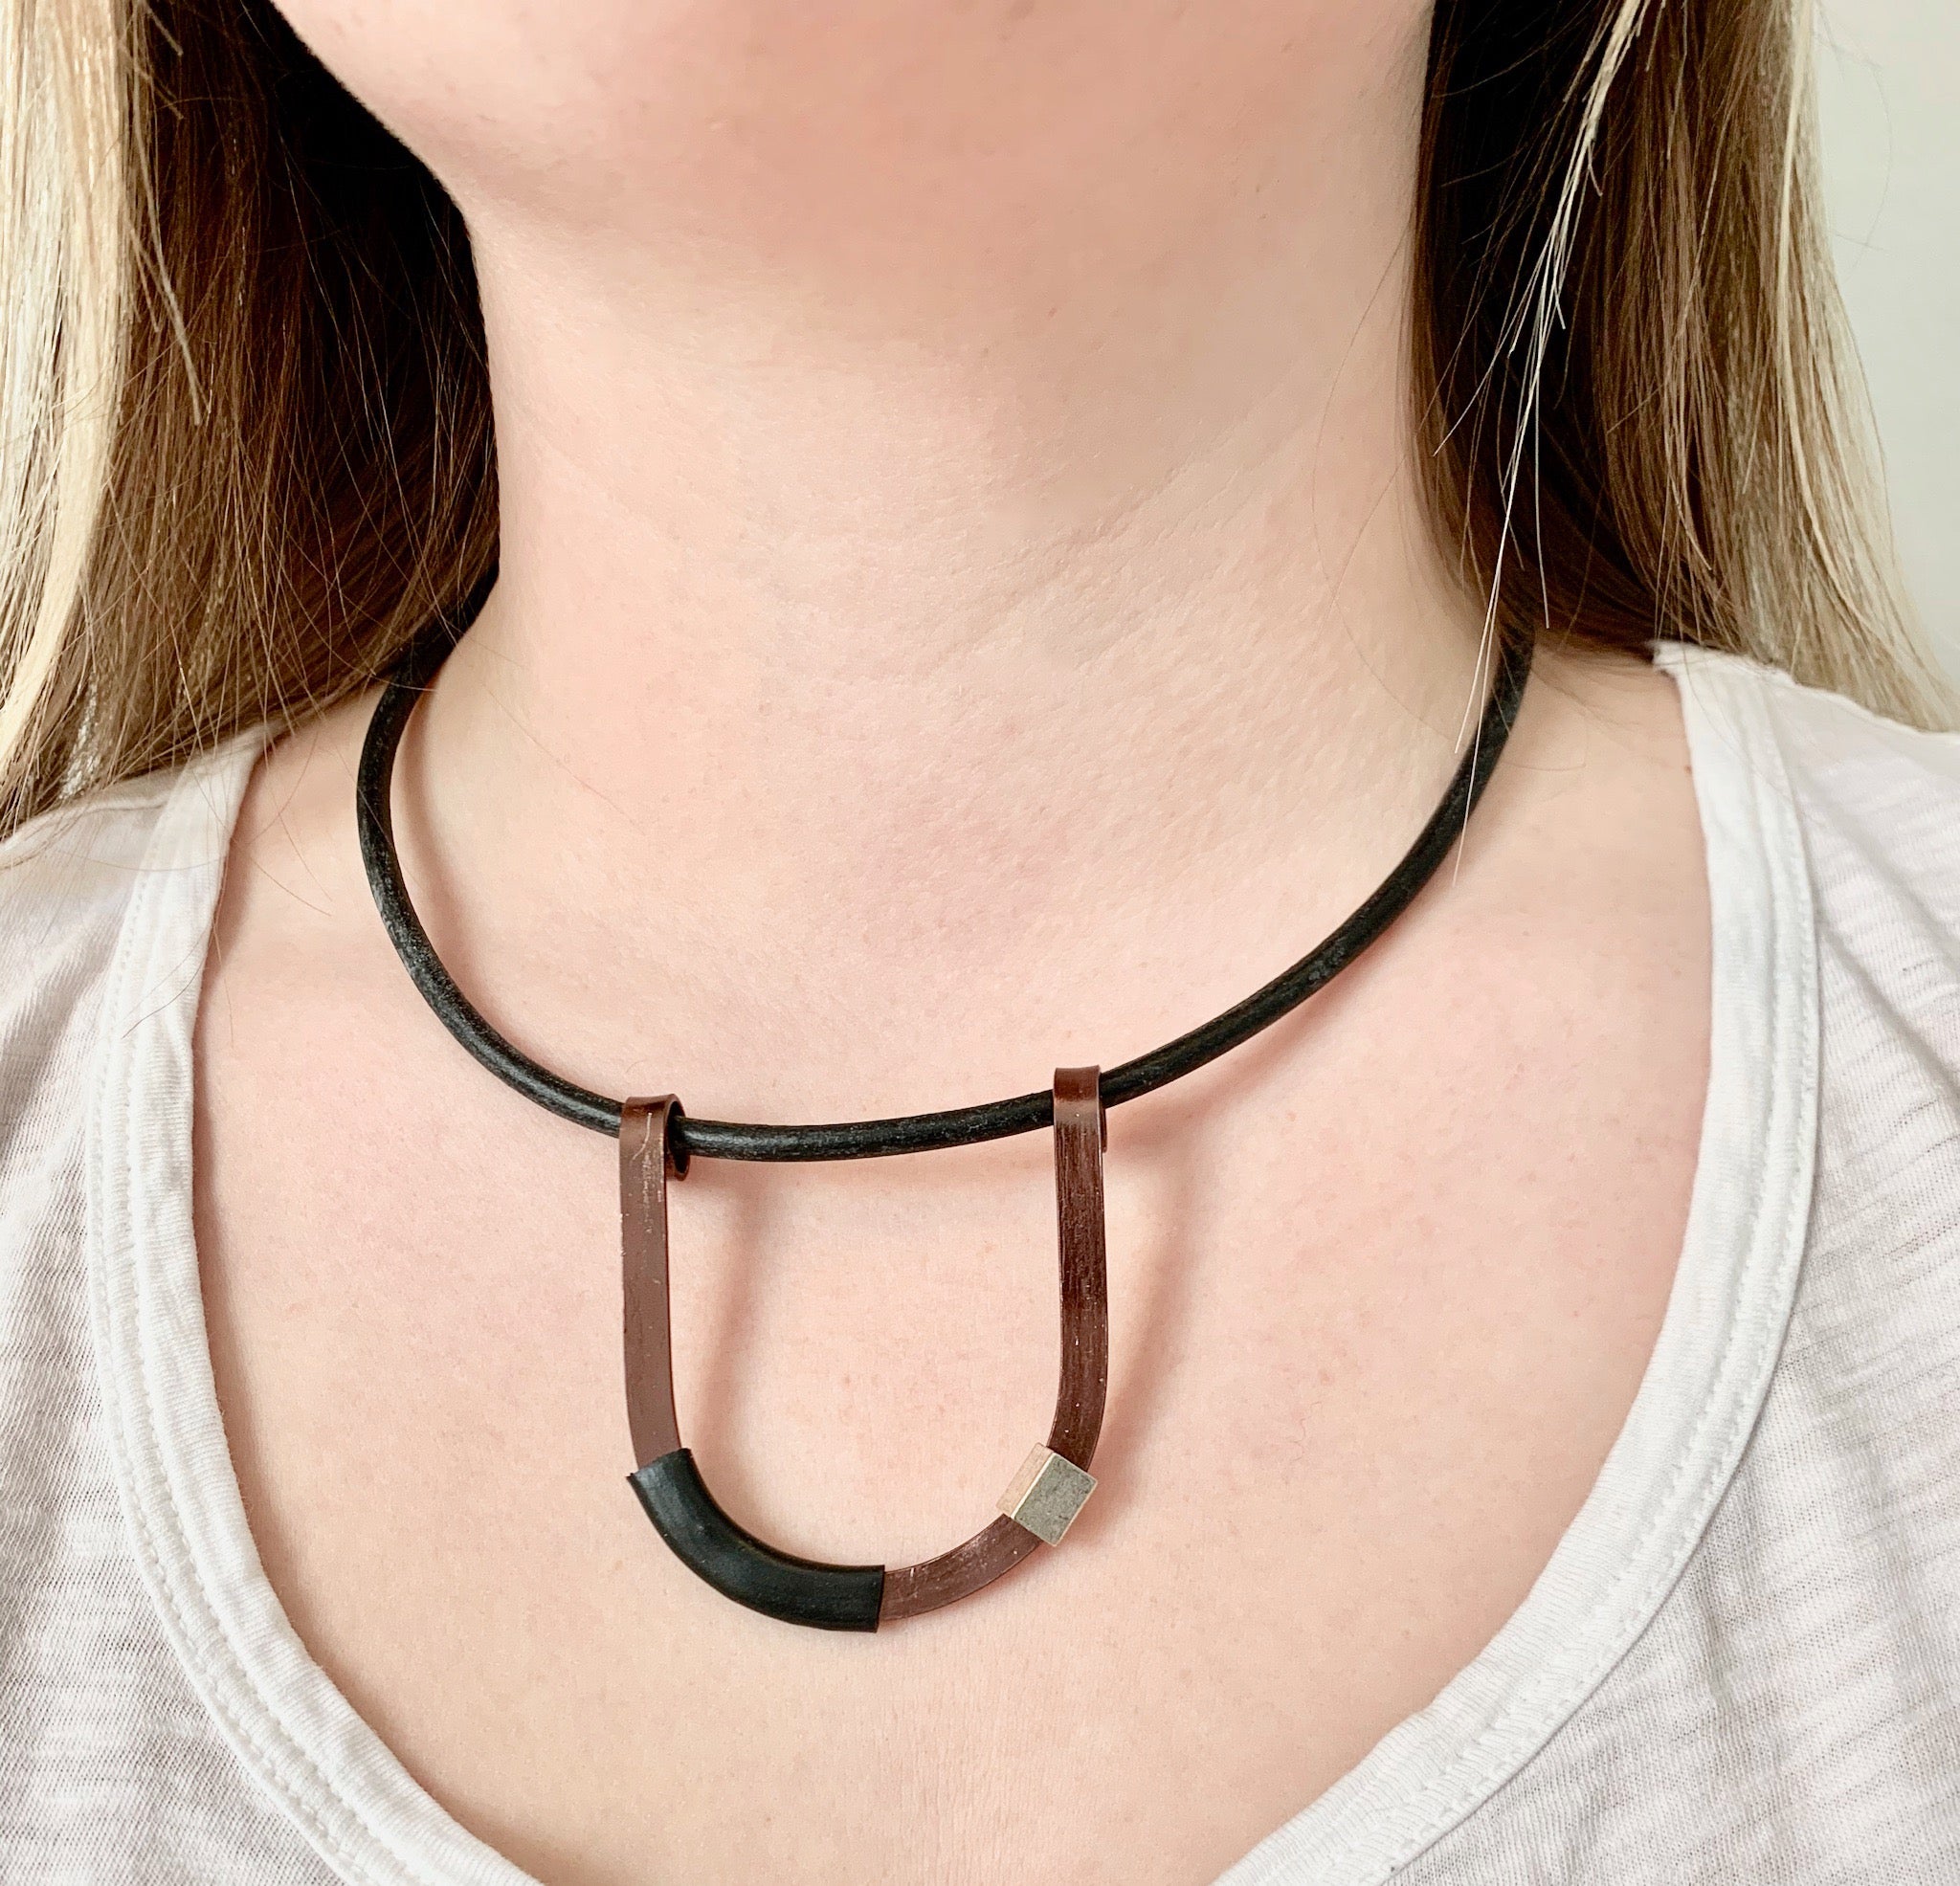 Isabelle is wearing the Bronze with Black Uline on a fine leather cord that hangs 42cm.